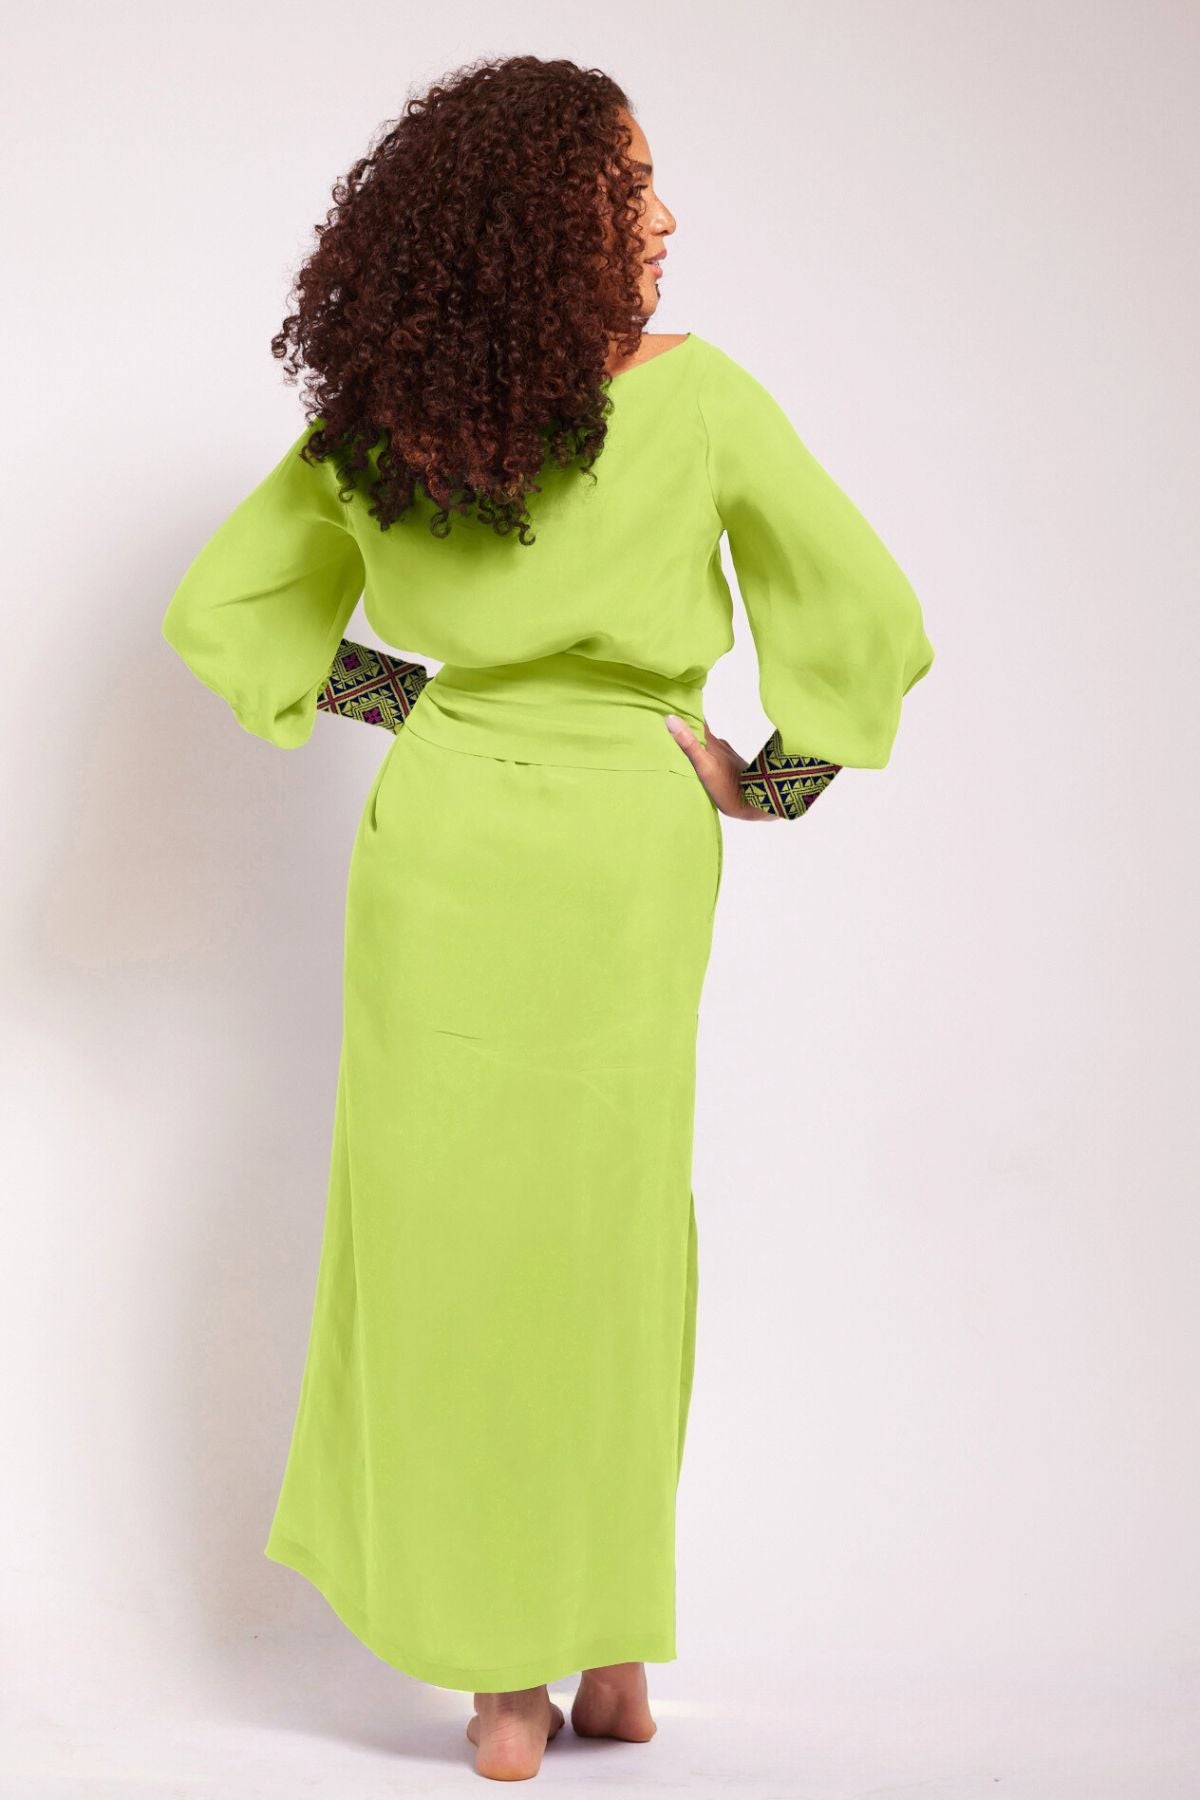 back view of woman modelling a bright yellow kaftan duster with embroidered sleeves made from recycled materials 6